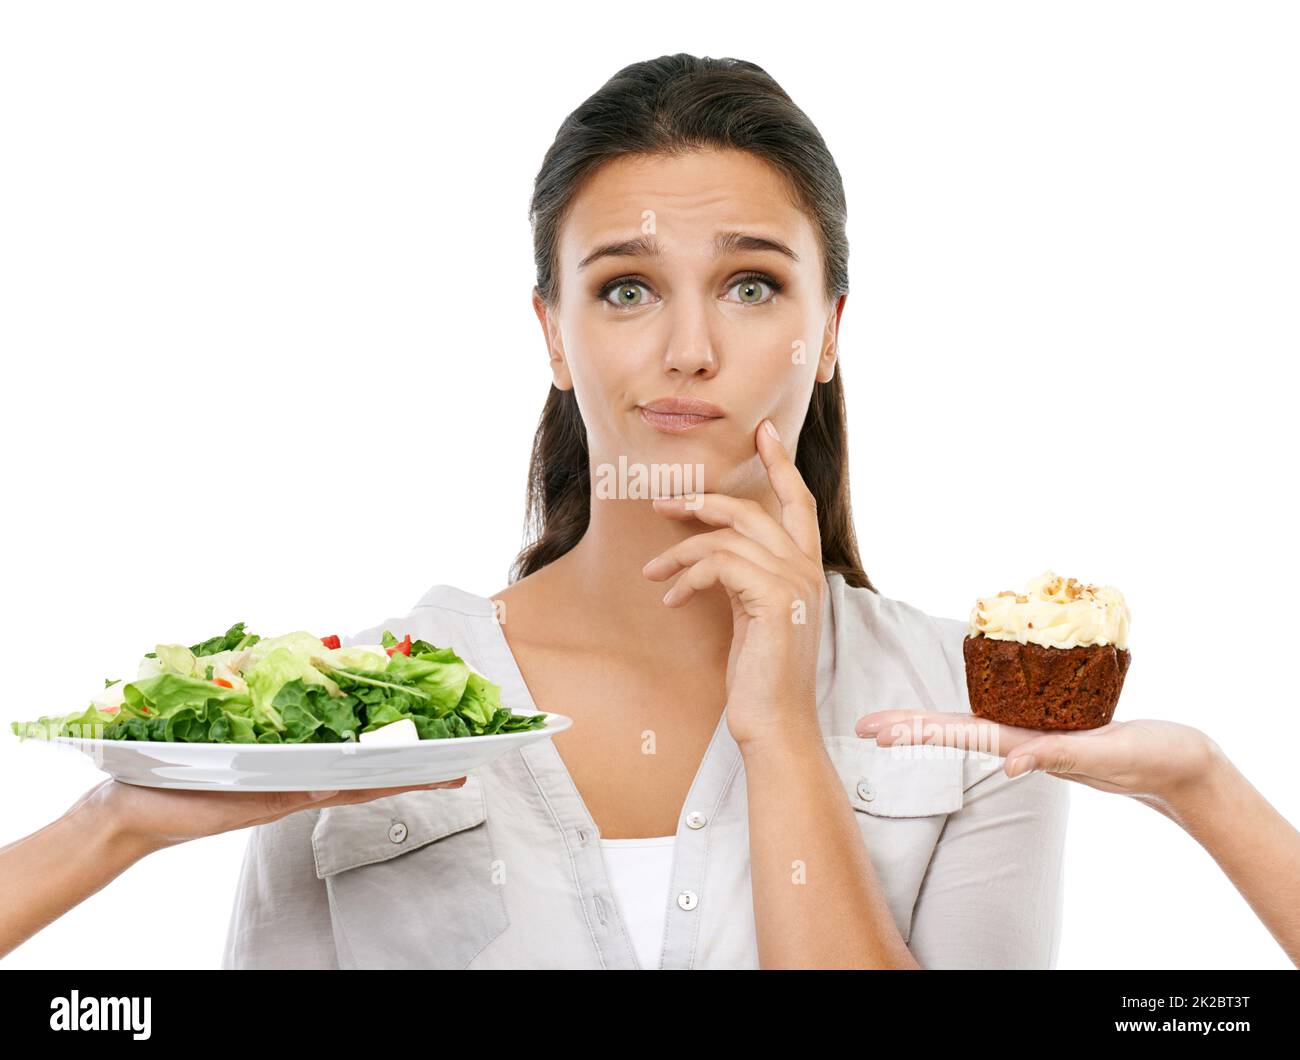 Should I or not. Studio shot of a young woman choosing between a healthy and unhealthy diet. Stock Photo